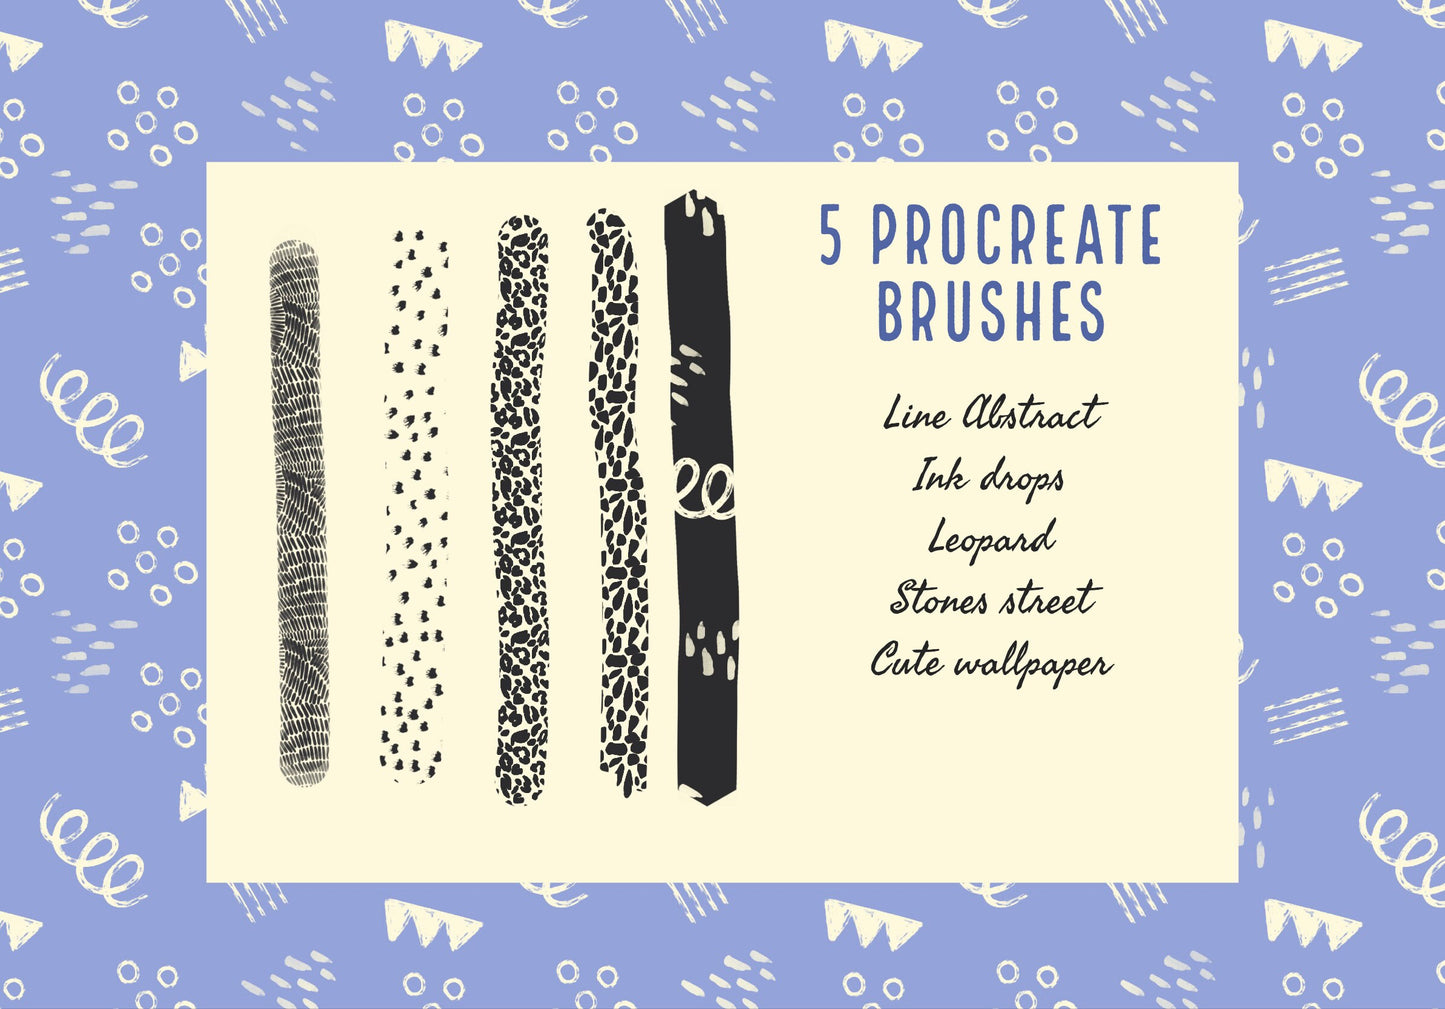 Abstract pattern brushes for Procreate